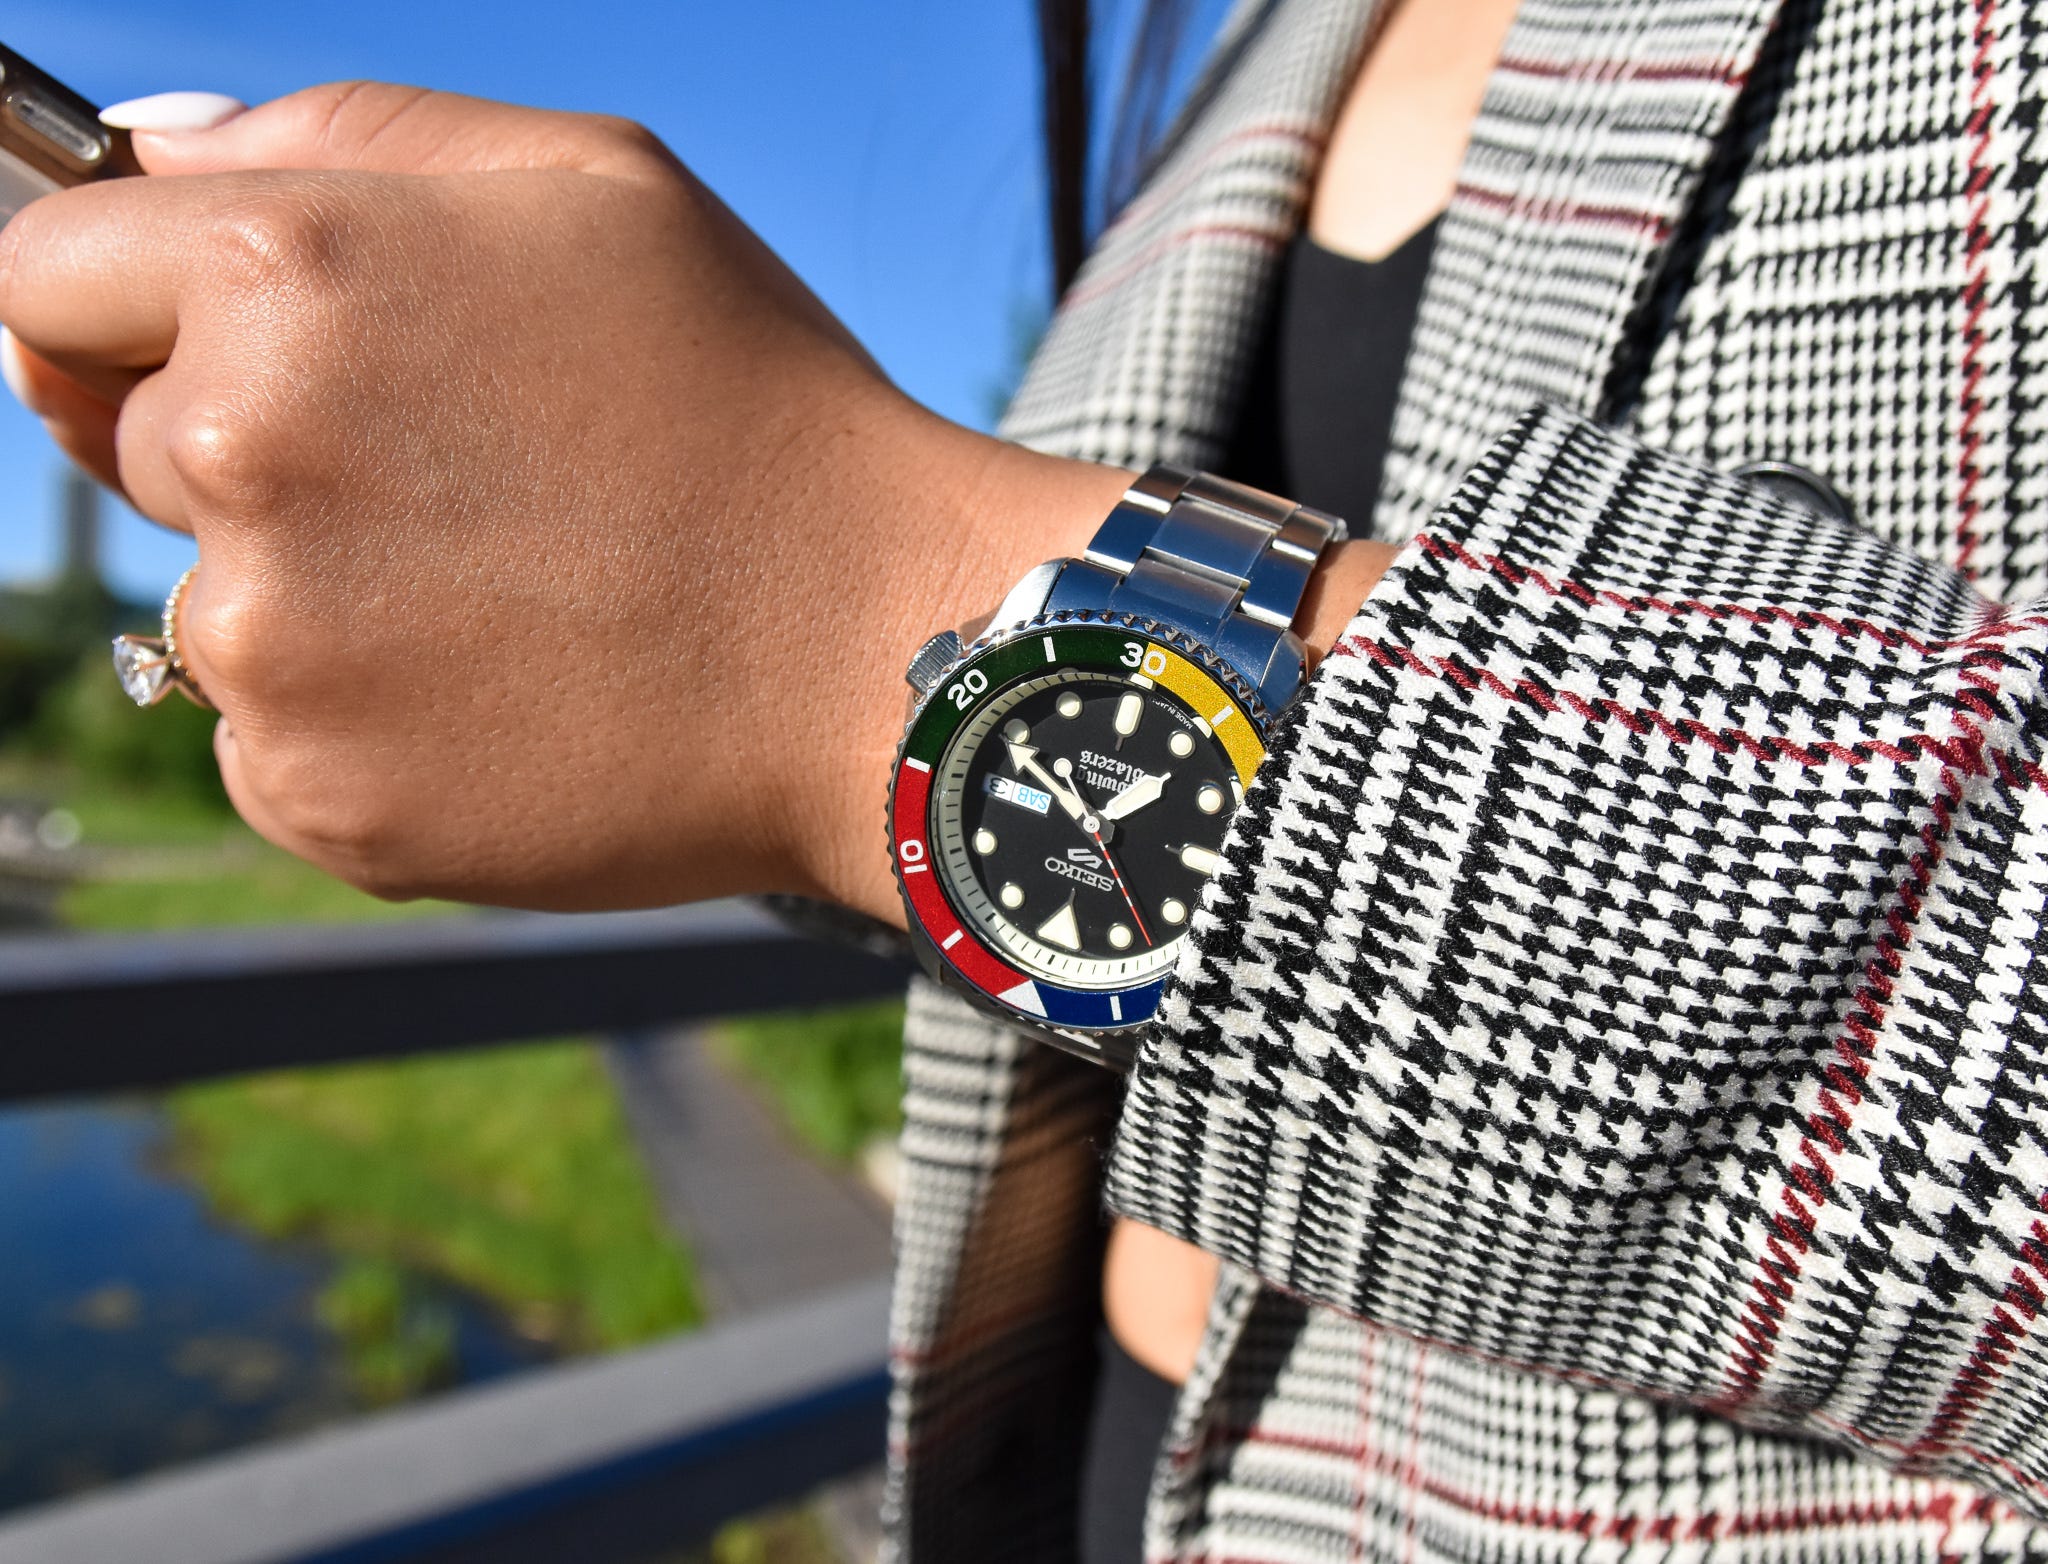 Hands-On: Rowing Blazers x Seiko Collection